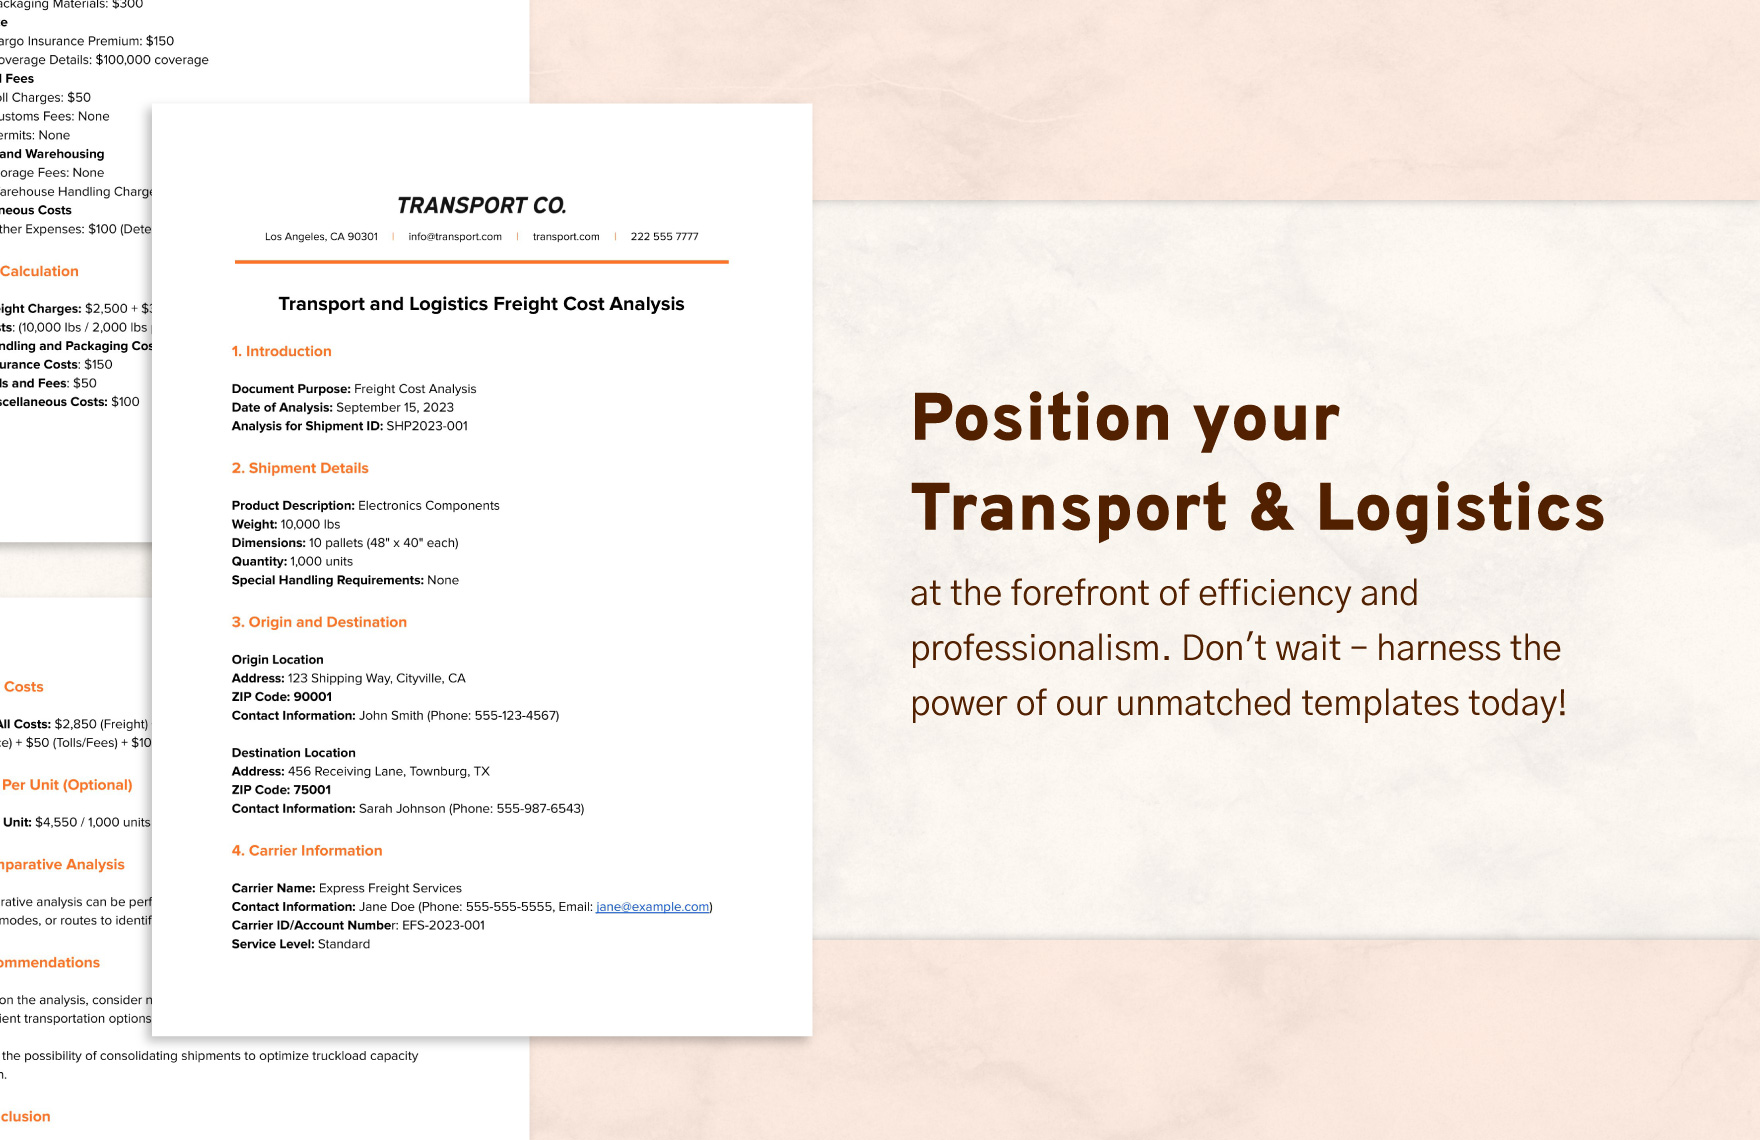 Transport and Logistics Freight Cost Analysis Template